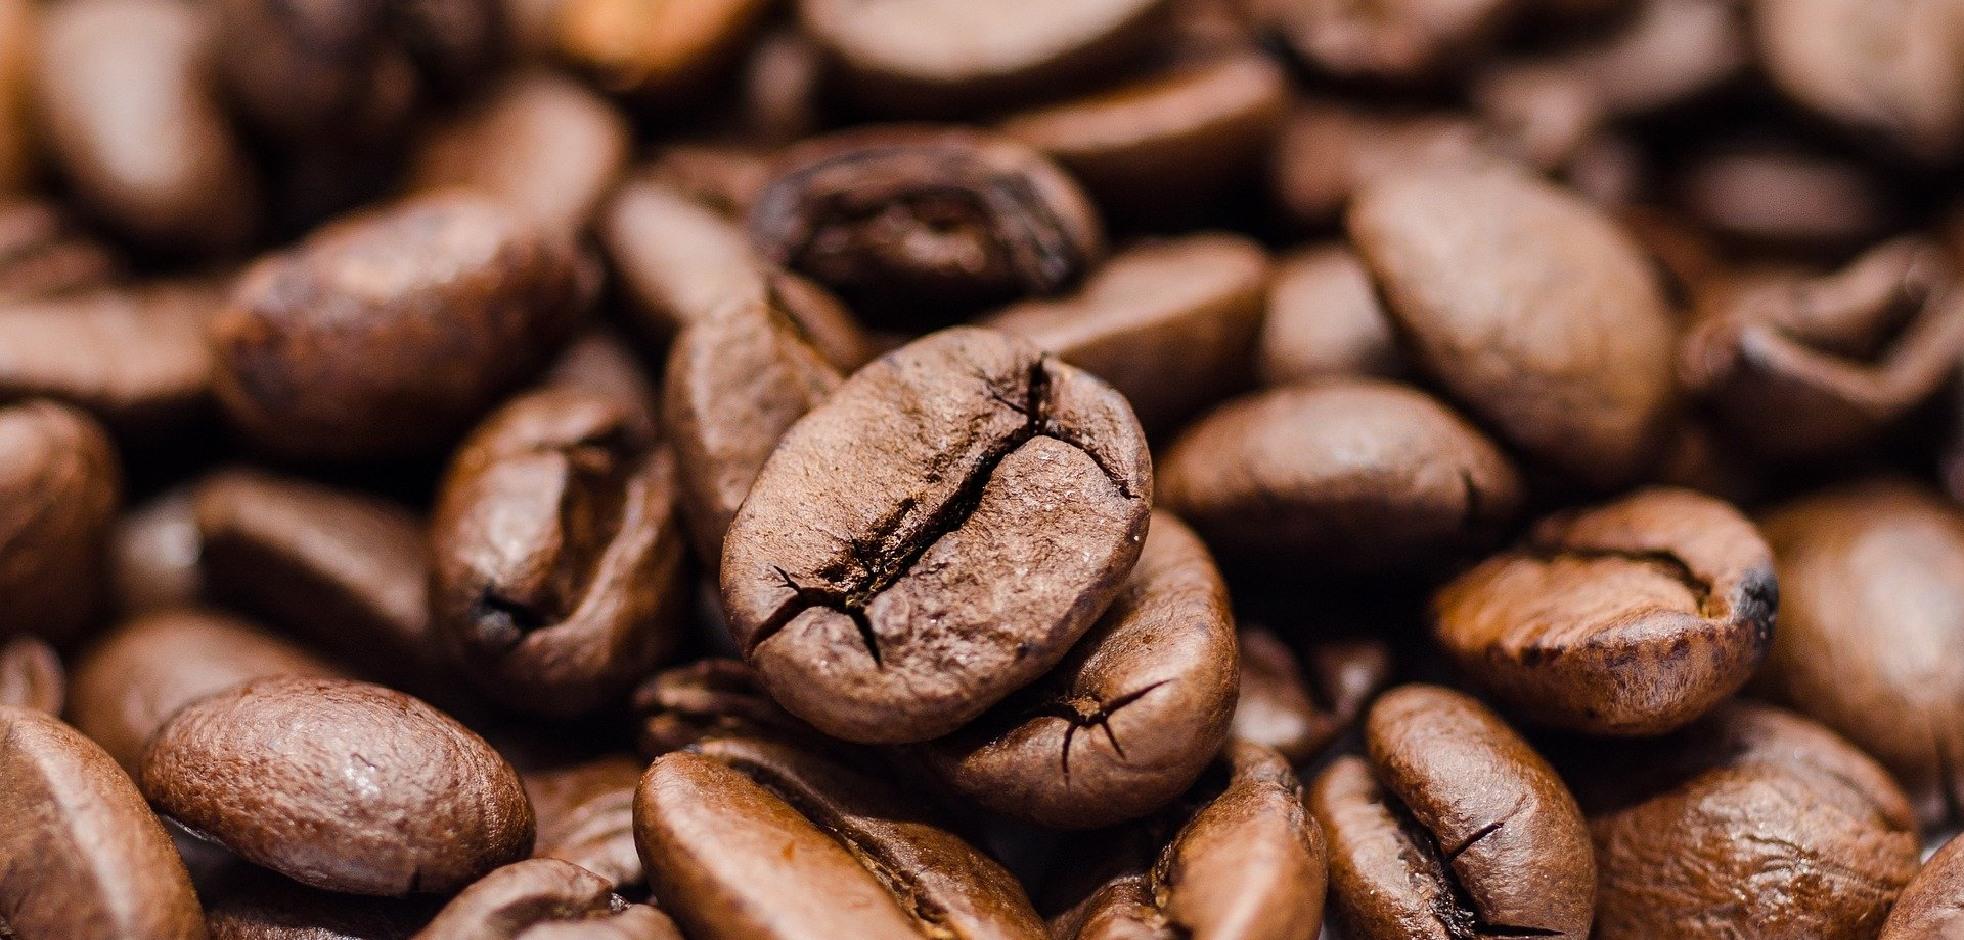 Close-up image of coffee beans